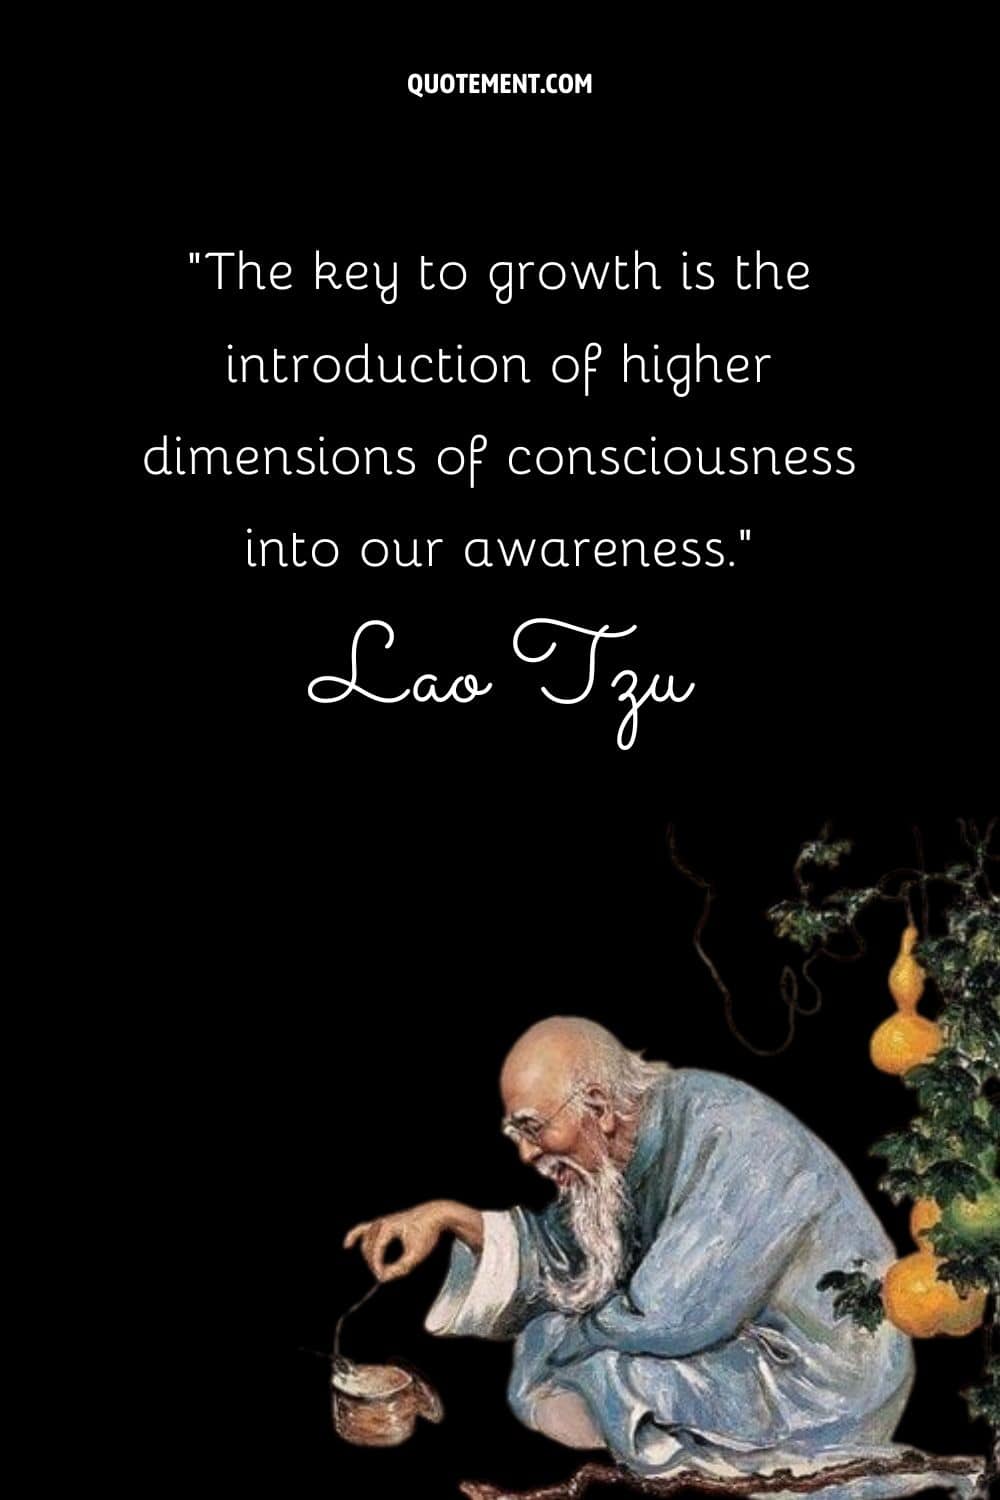 The key to growth is the introduction of higher dimensions of consciousness into our awareness